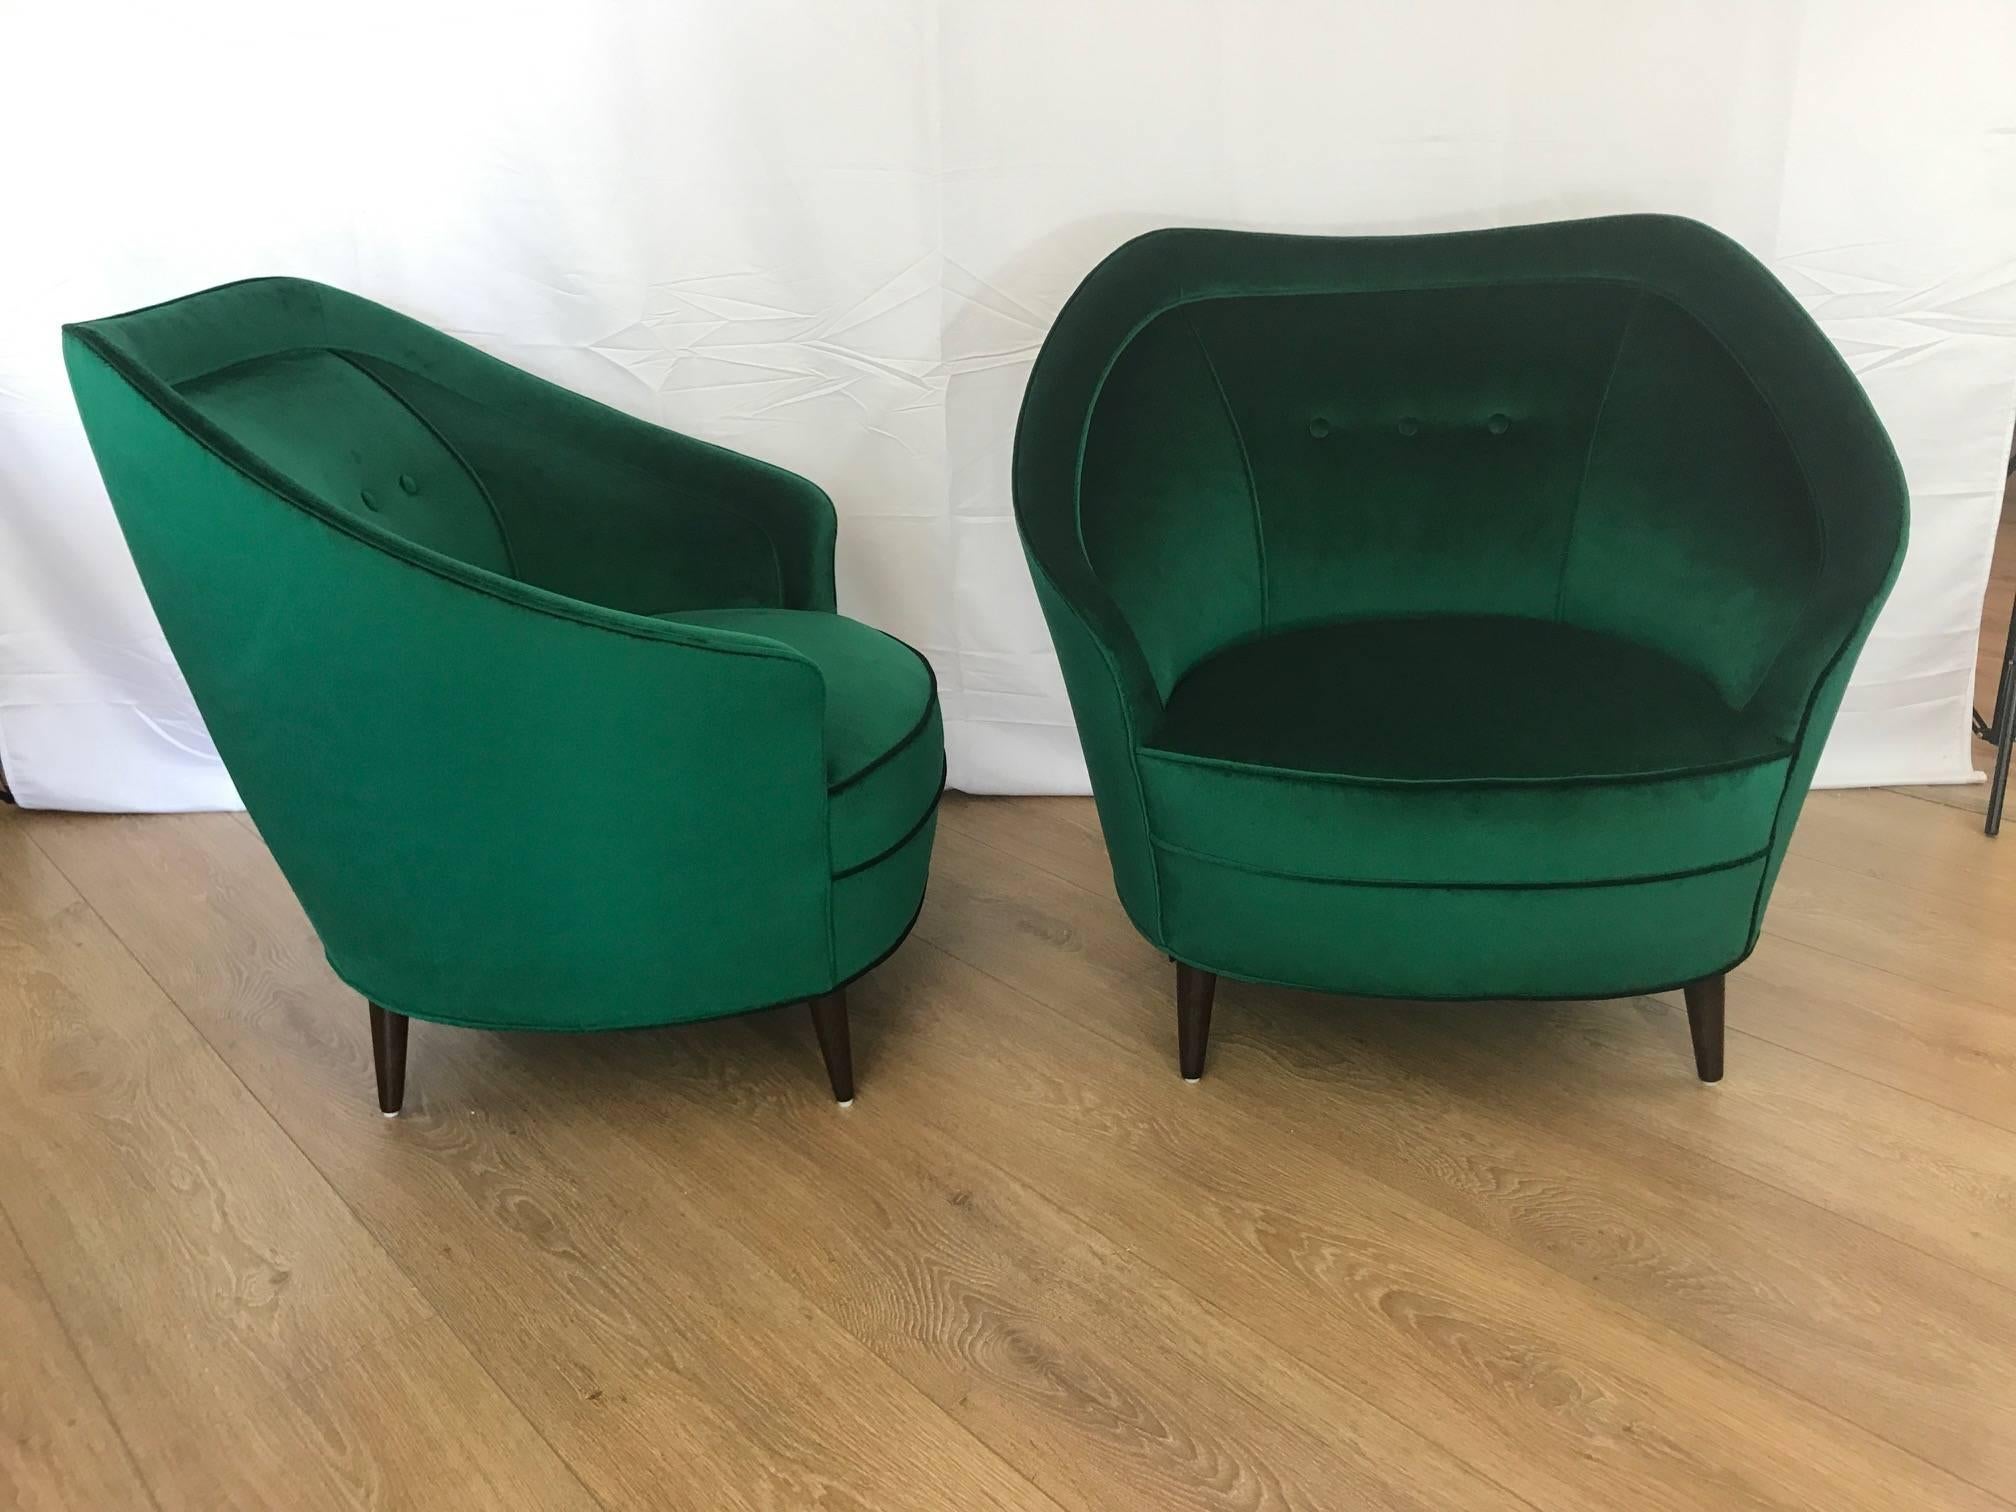 Pair of Italian mid century lounge chairs.  Newly upholstered with Lafayette green velvet, wooden conical legs.